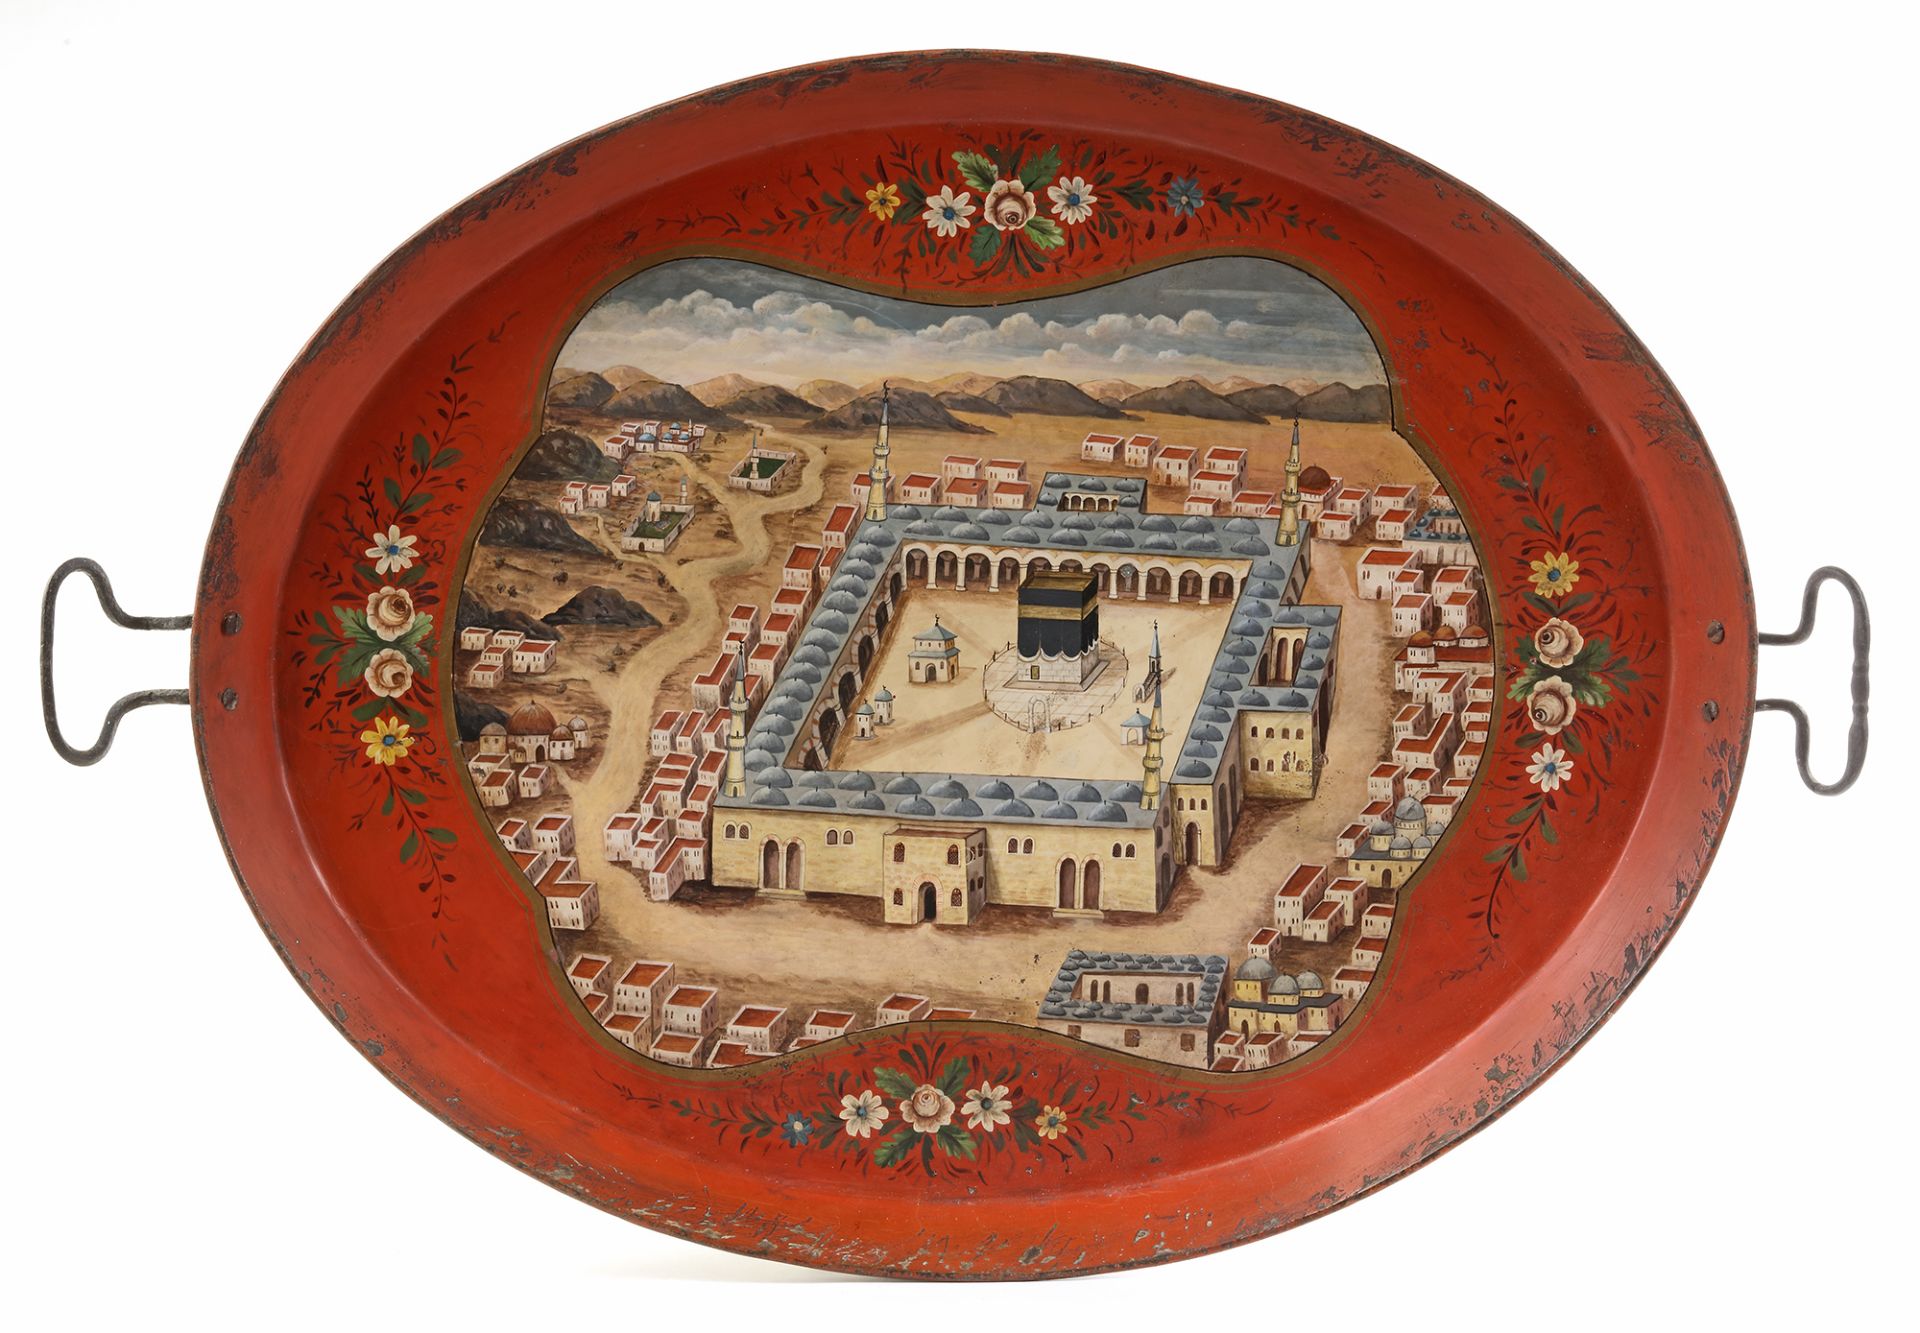 AN OTTOMAN PAINTED METAL TRAY WITH A DEPICTION OF THE MASJID AL-HARAM AT MECCA,TURKEY, PROBABLY ISTA